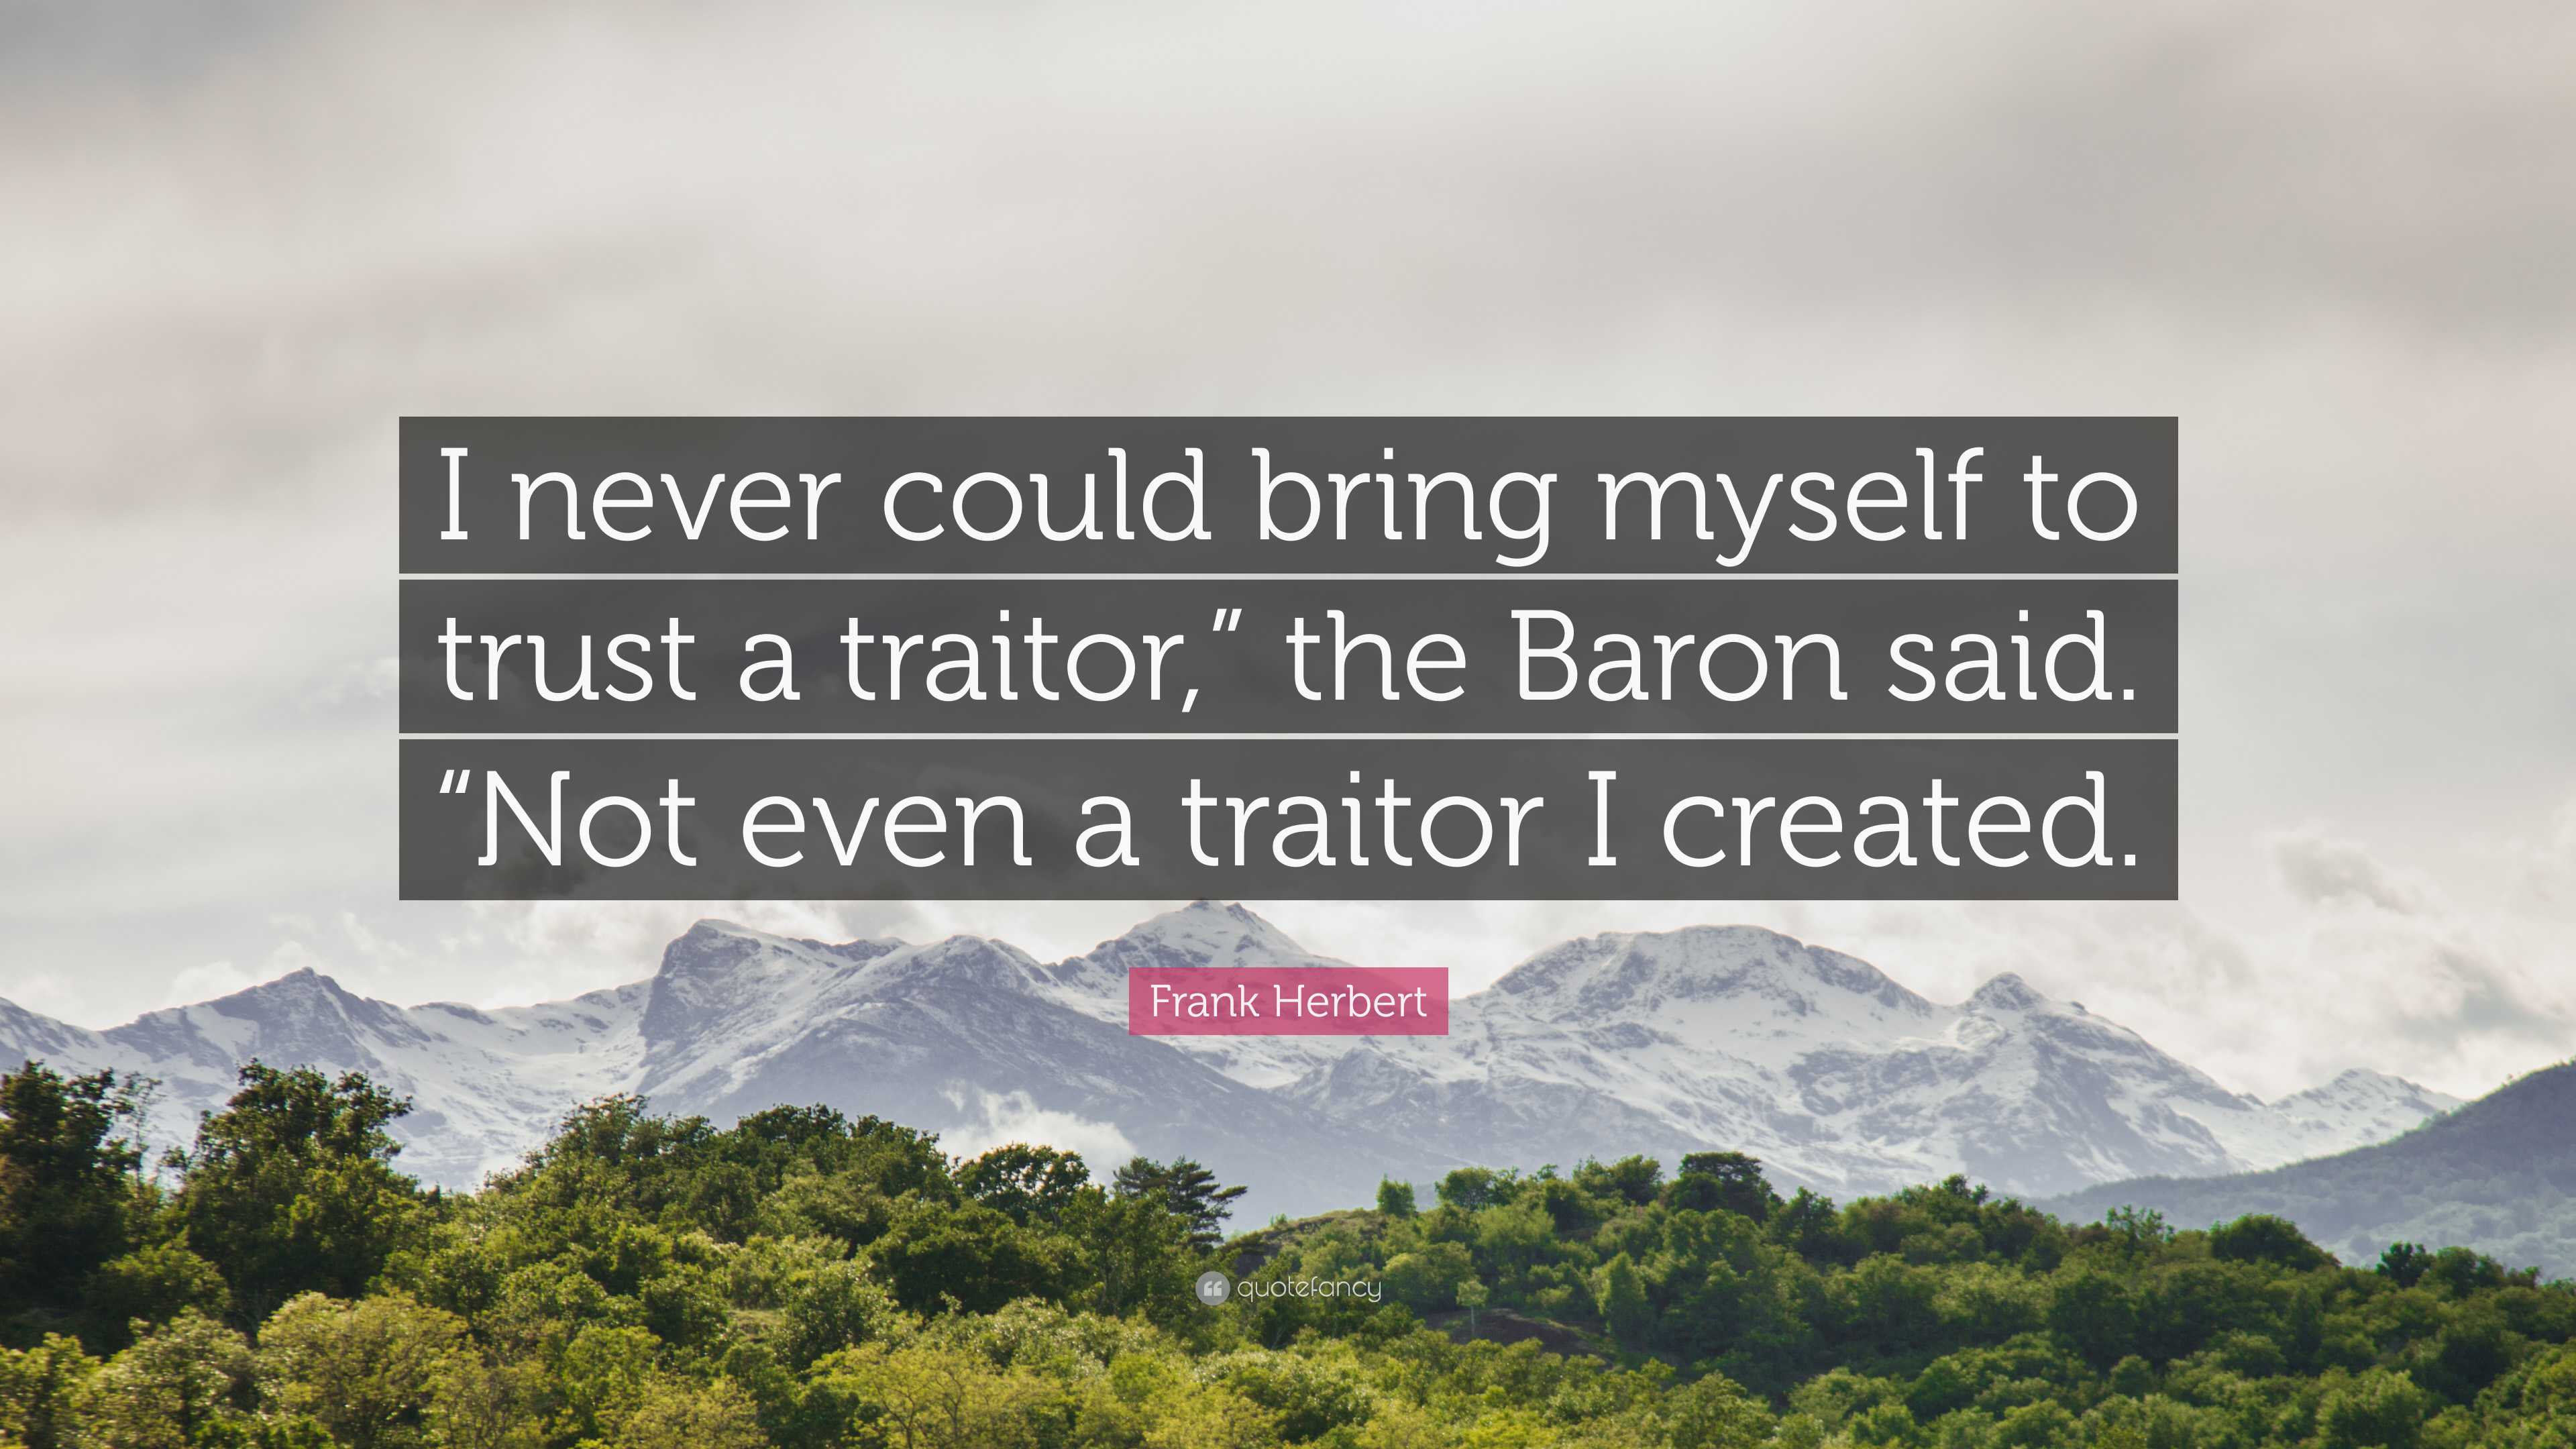 Once a Traitor Always a Traitor Quotes - Motivation and Love